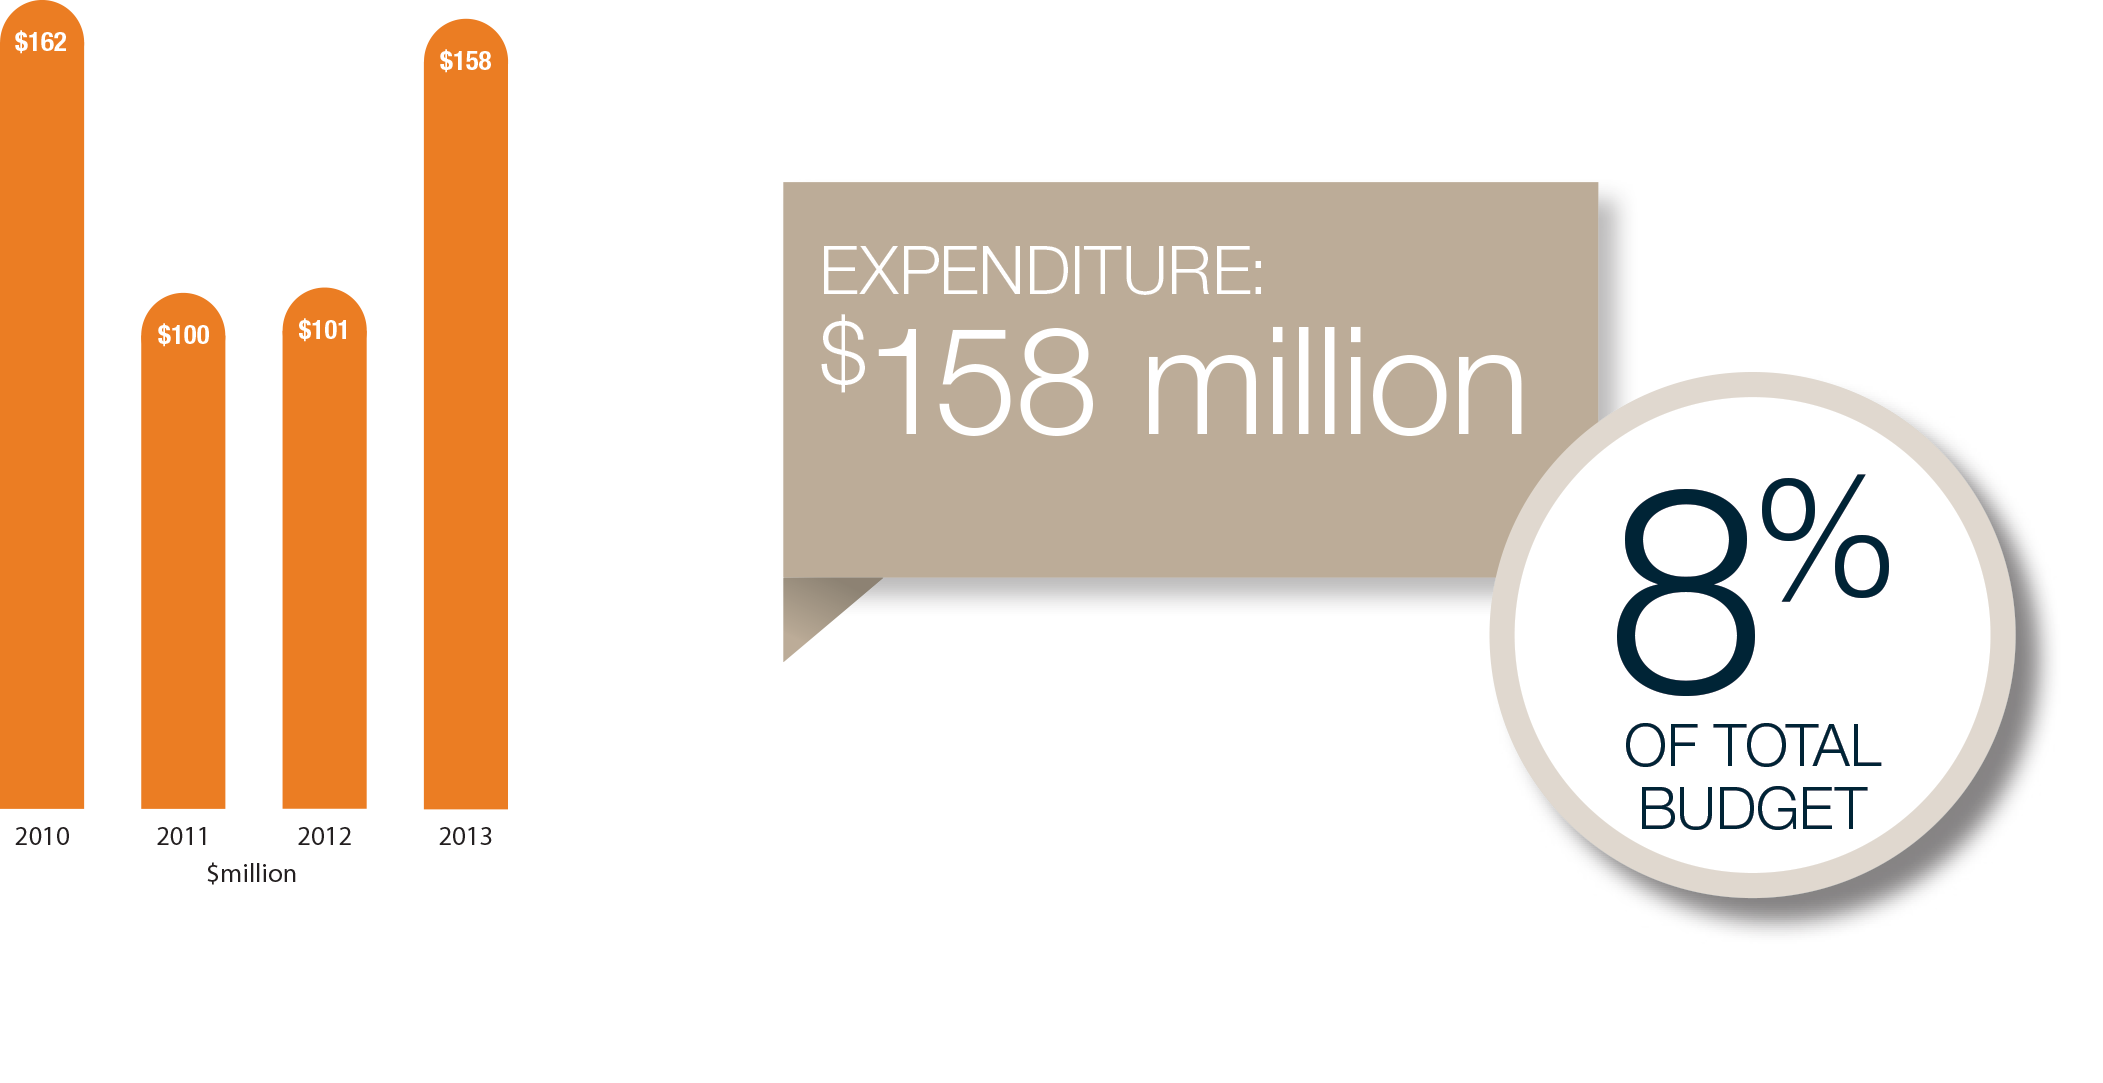 Expenditure in 2013 was $158 million or 8% of the total budget